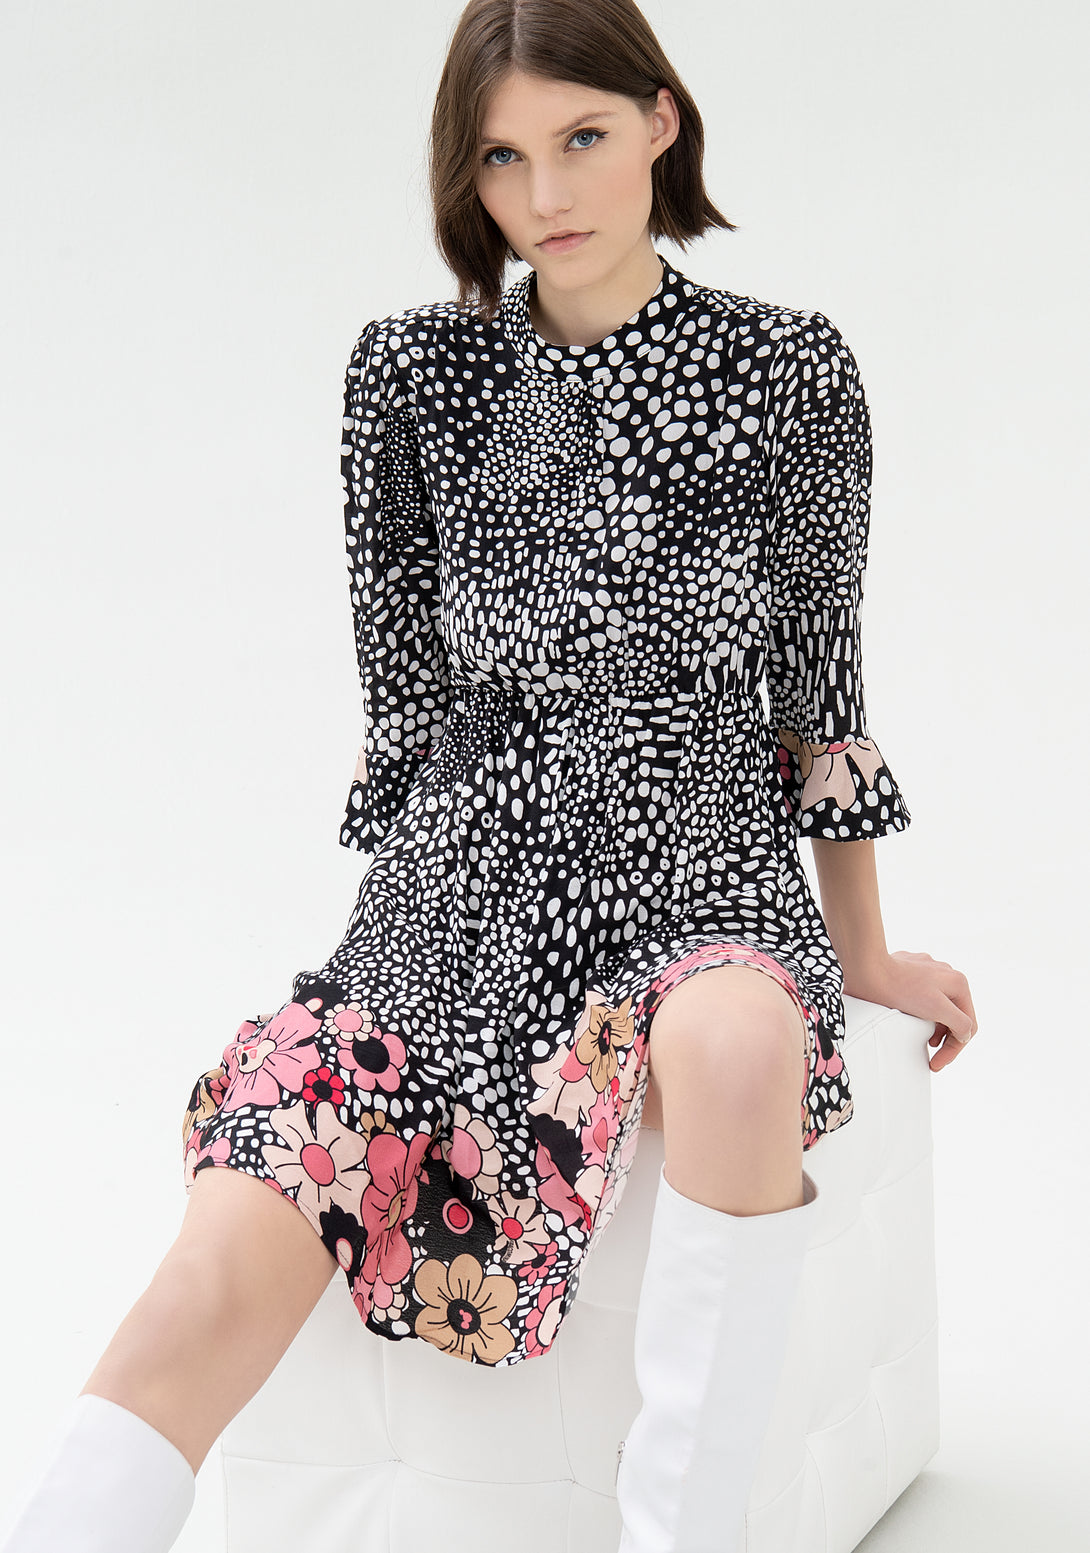 Mini dress regular fit made in viscose with animalier print with flowers